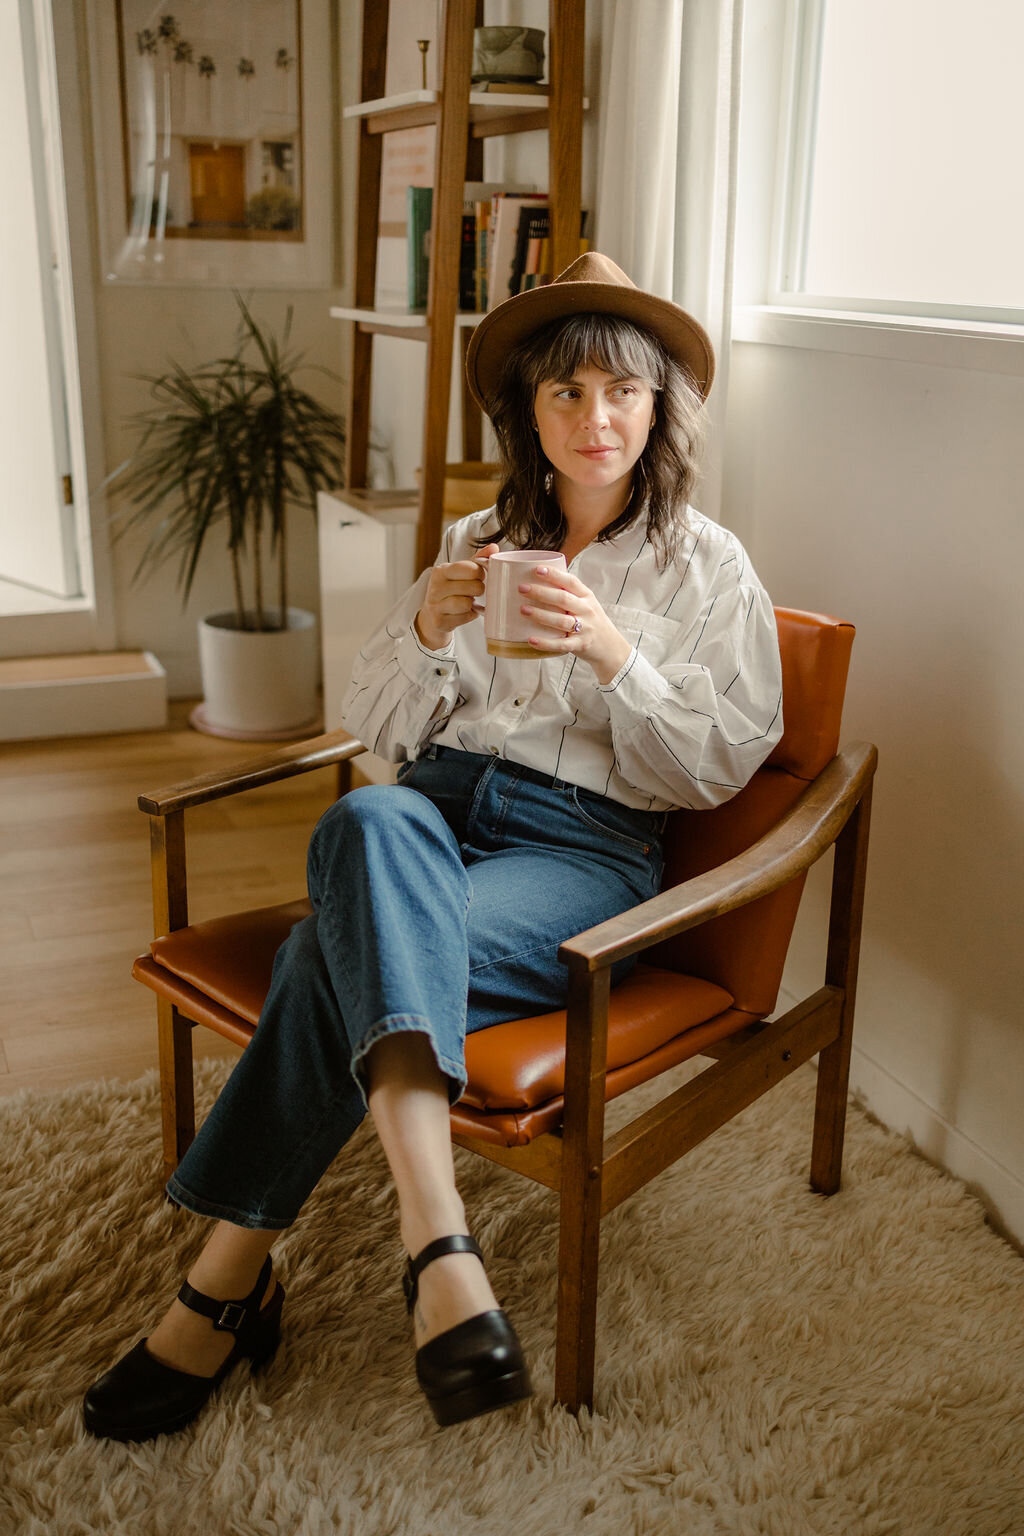 Web designer Carrie Bondioli sits in a chair and holds a cup of coffee.